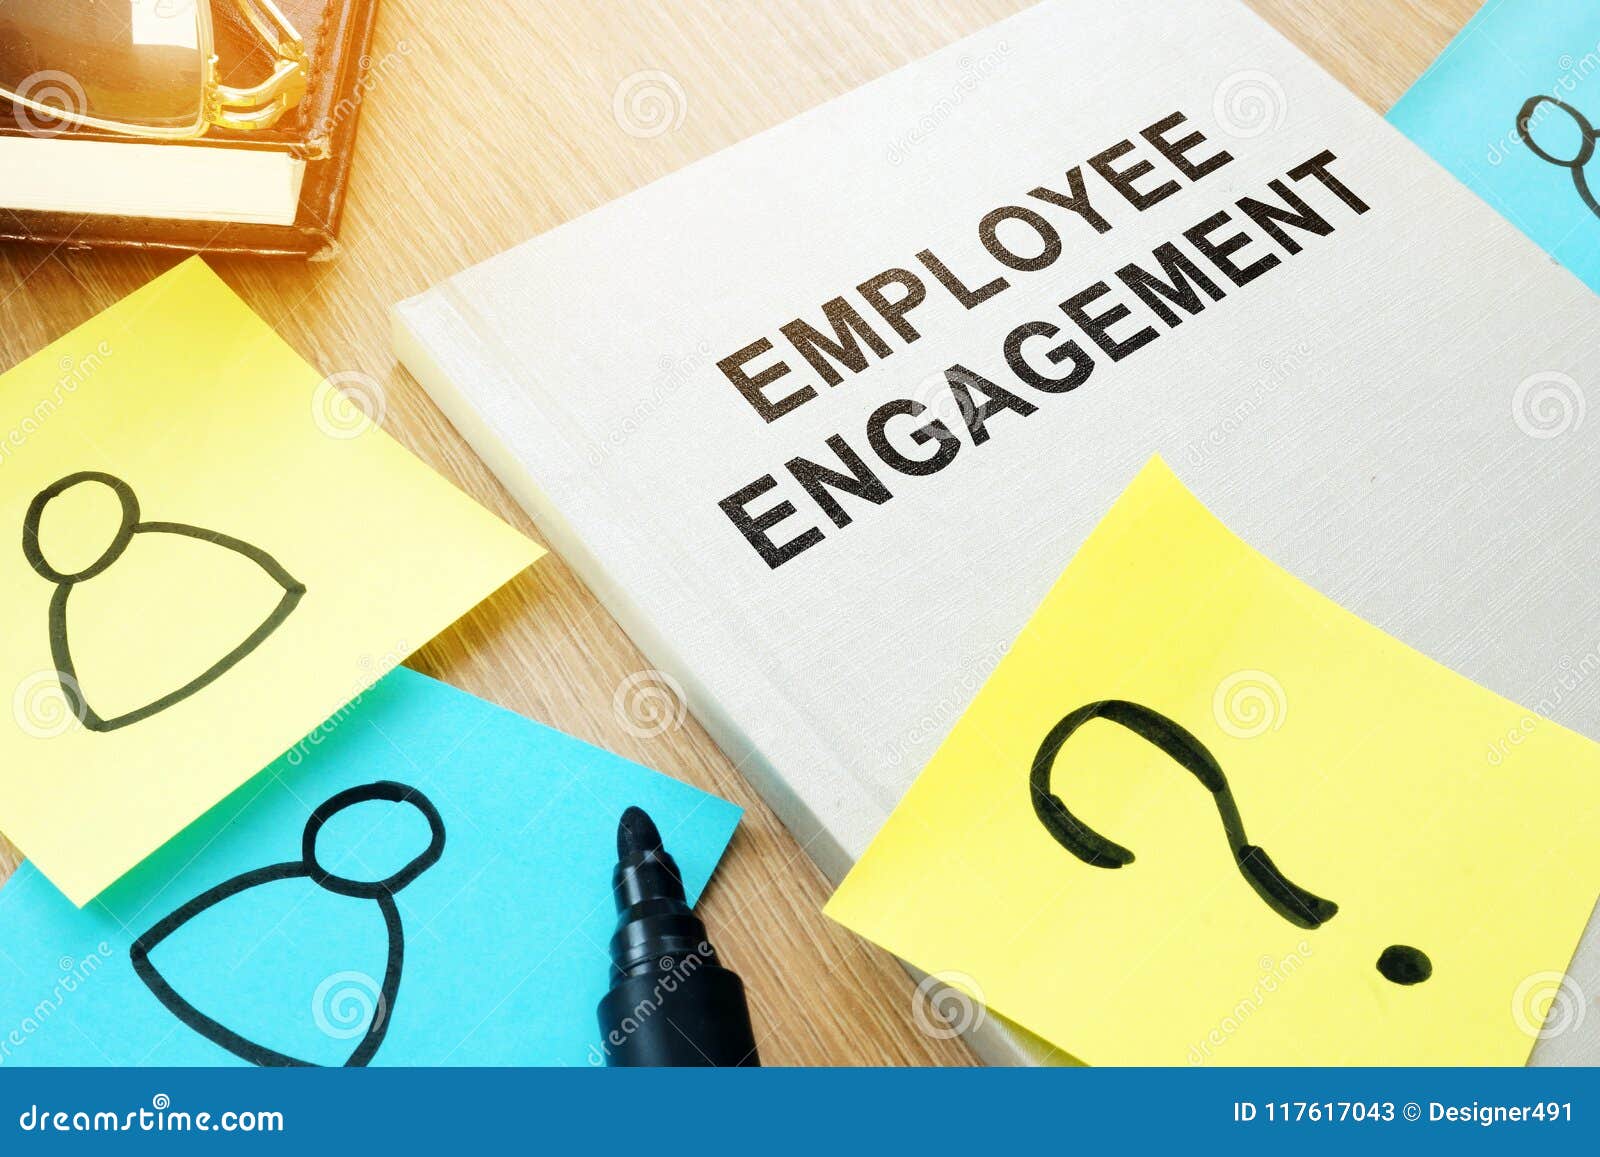 book with title employee engagement.